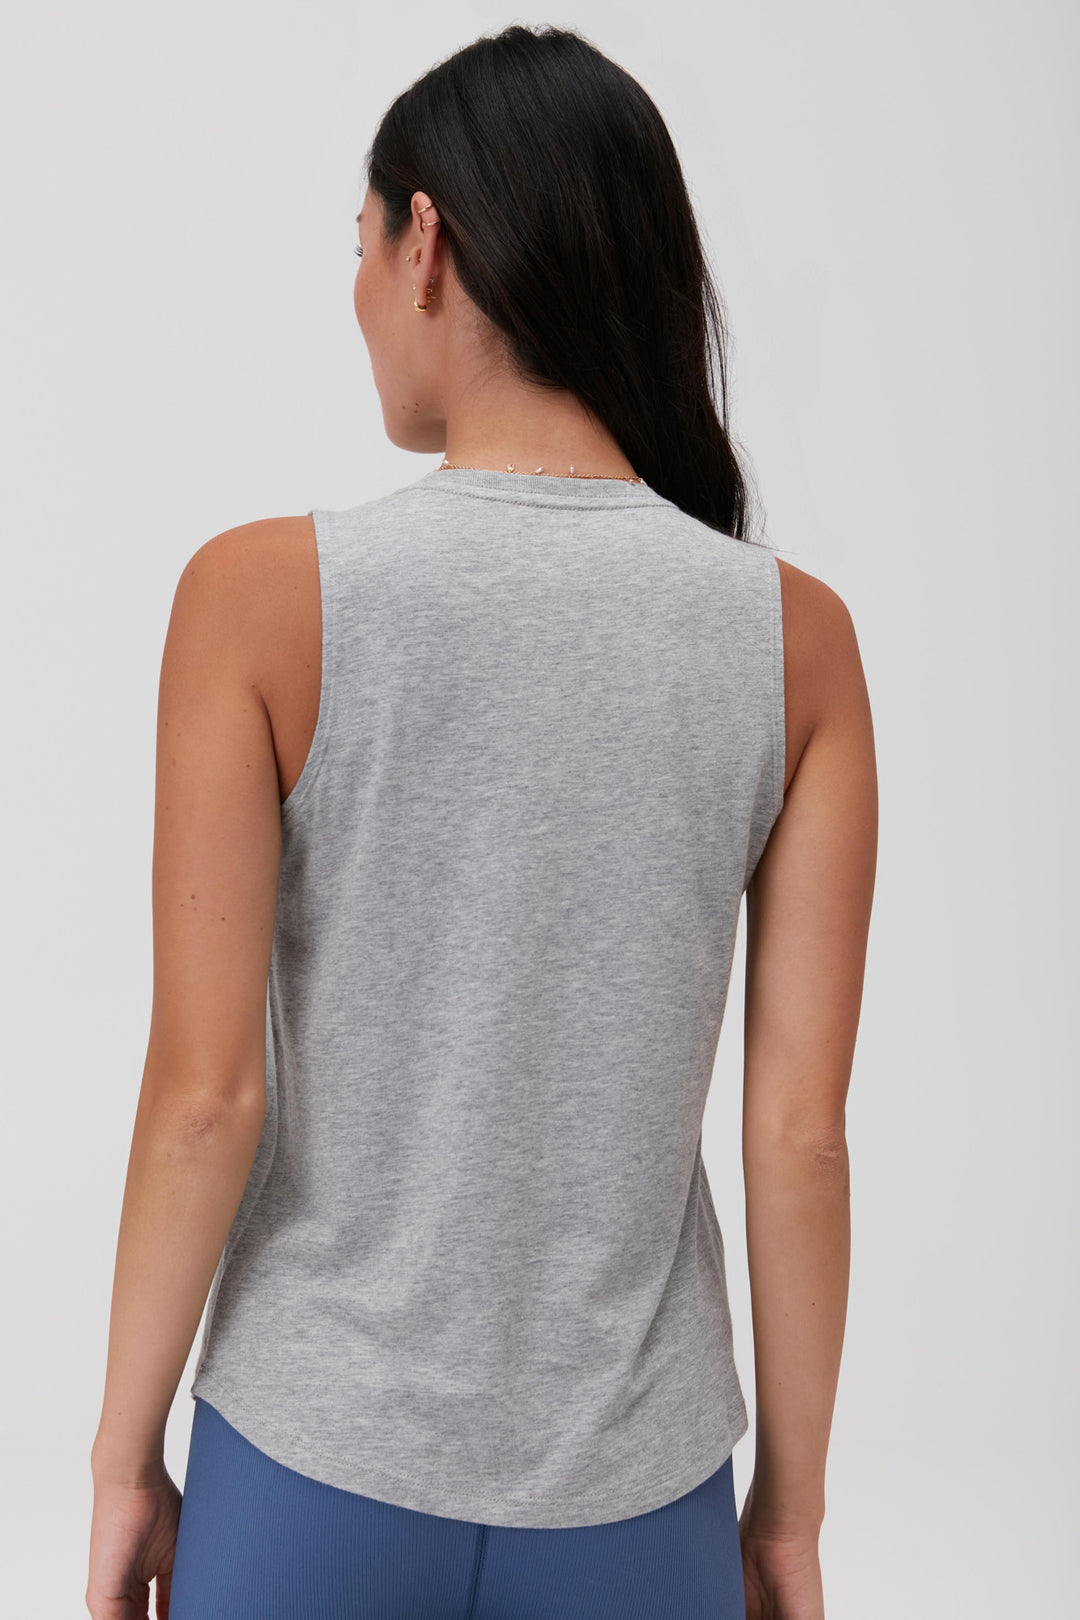 TRUST THE MAGIC TANK - HEATHER GREY - Kingfisher Road - Online Boutique